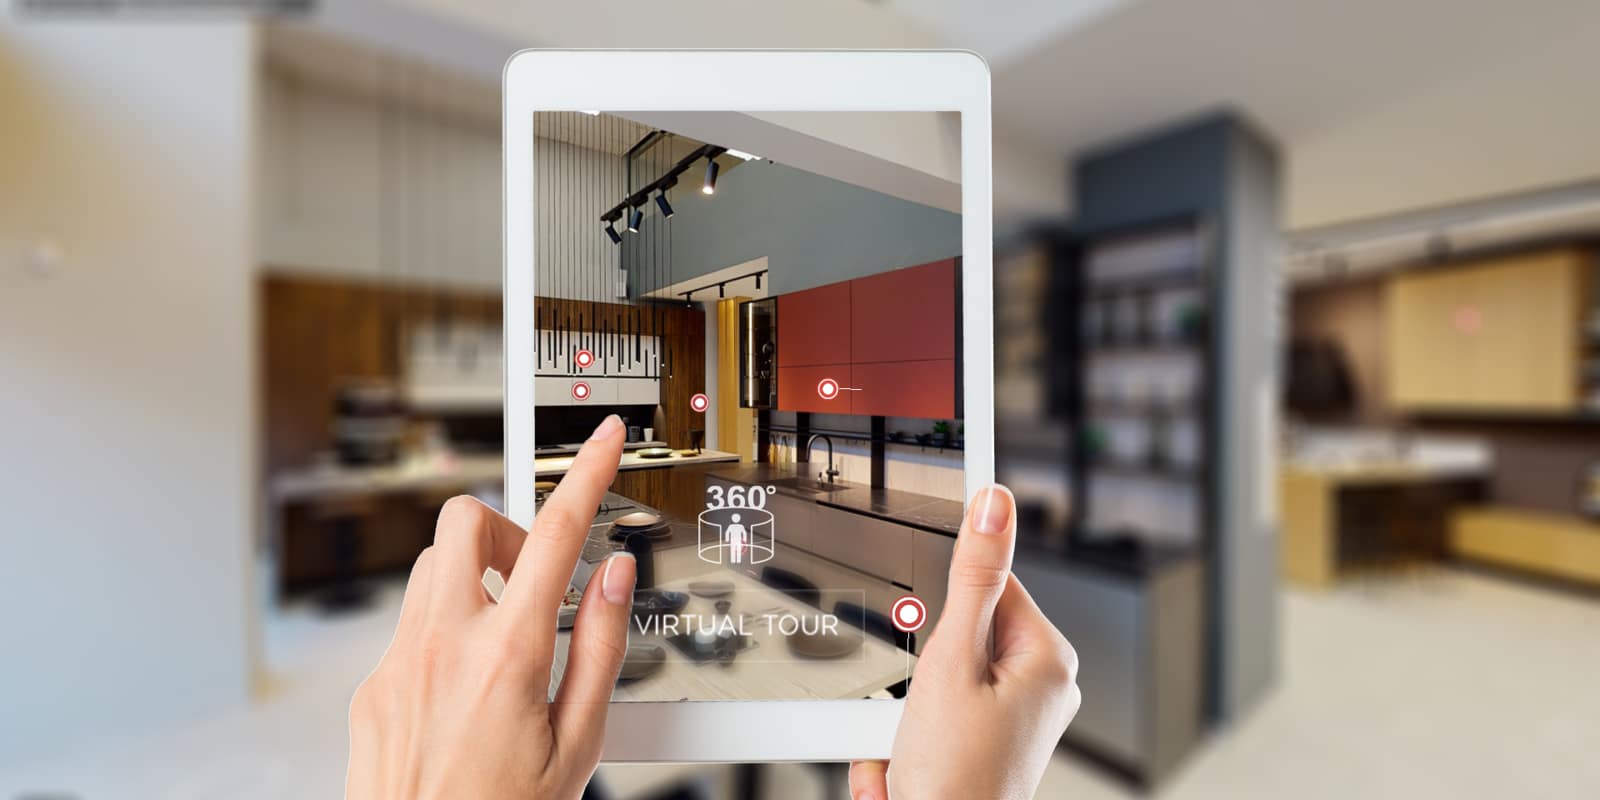 CENTRO pioneers by creating the first virtual tour for CENTRO store in Thessaloniki